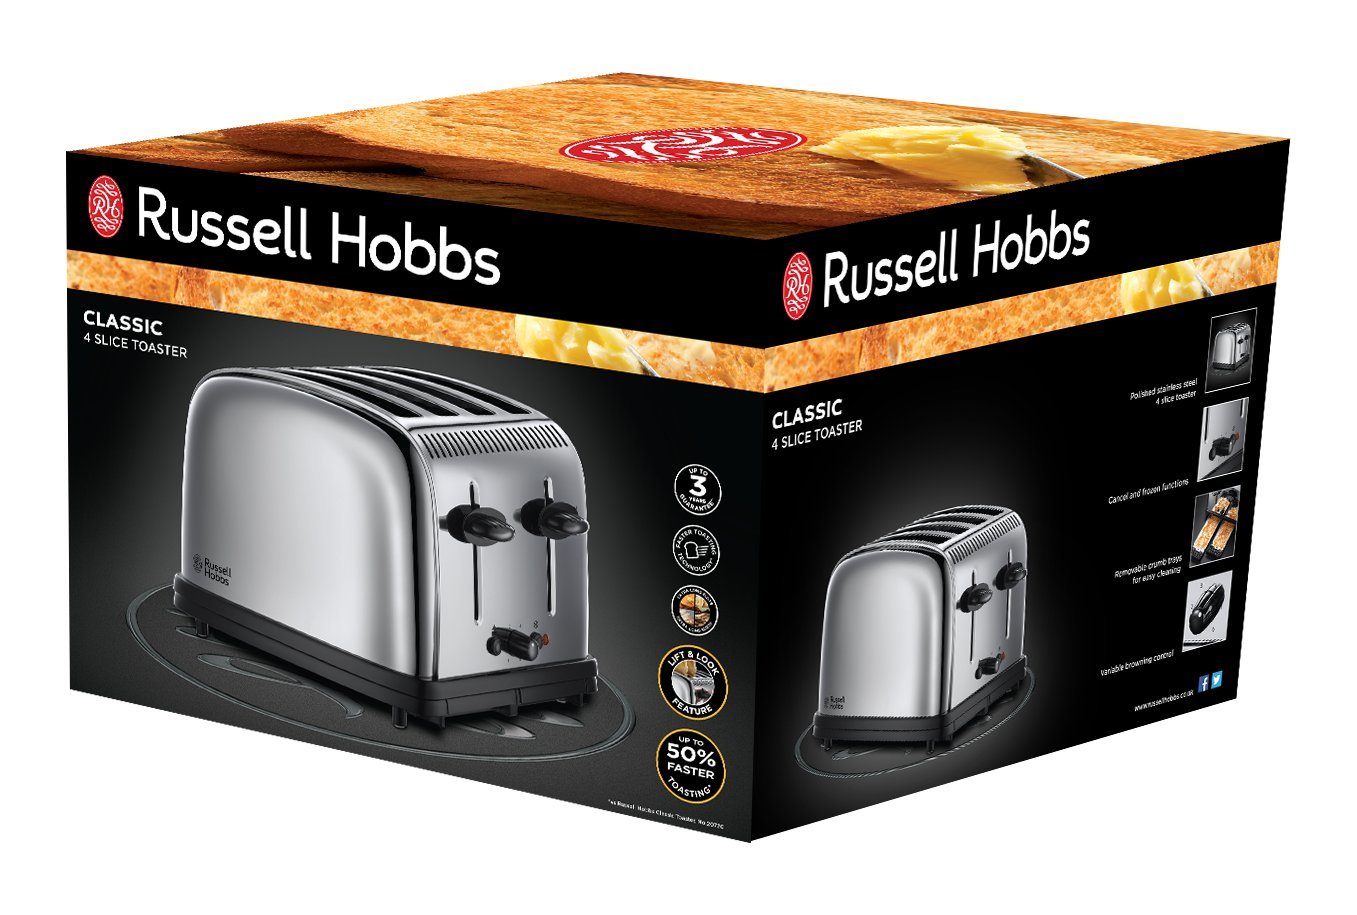 Russell Hobbs Classic Stainless Steel 4 Slice Bread Toaster with High Lift & Wide Slots, Adjustable Browning Control راسيل هوبز حماصة 4 ستانلس ستيل